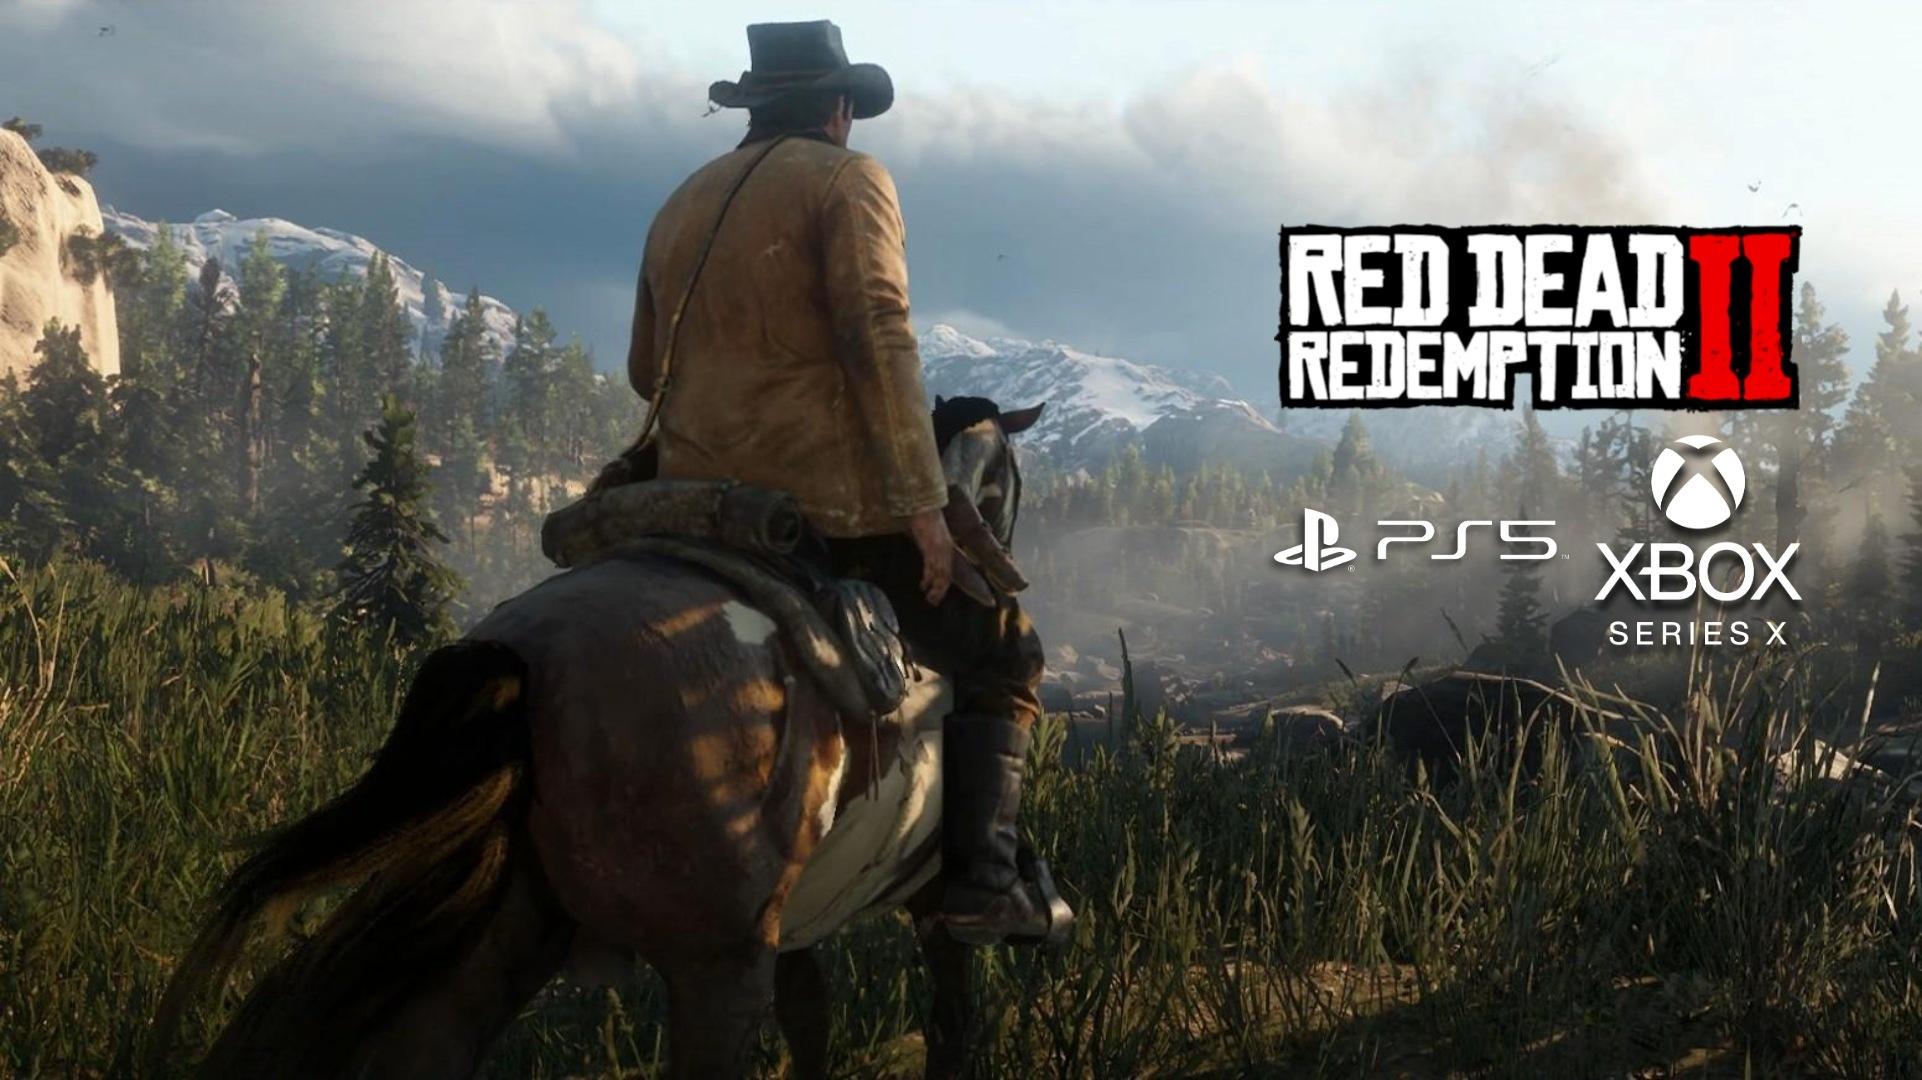 Red Dead Redemption 2 Reportedly Coming to PS5 and Xbox Series X